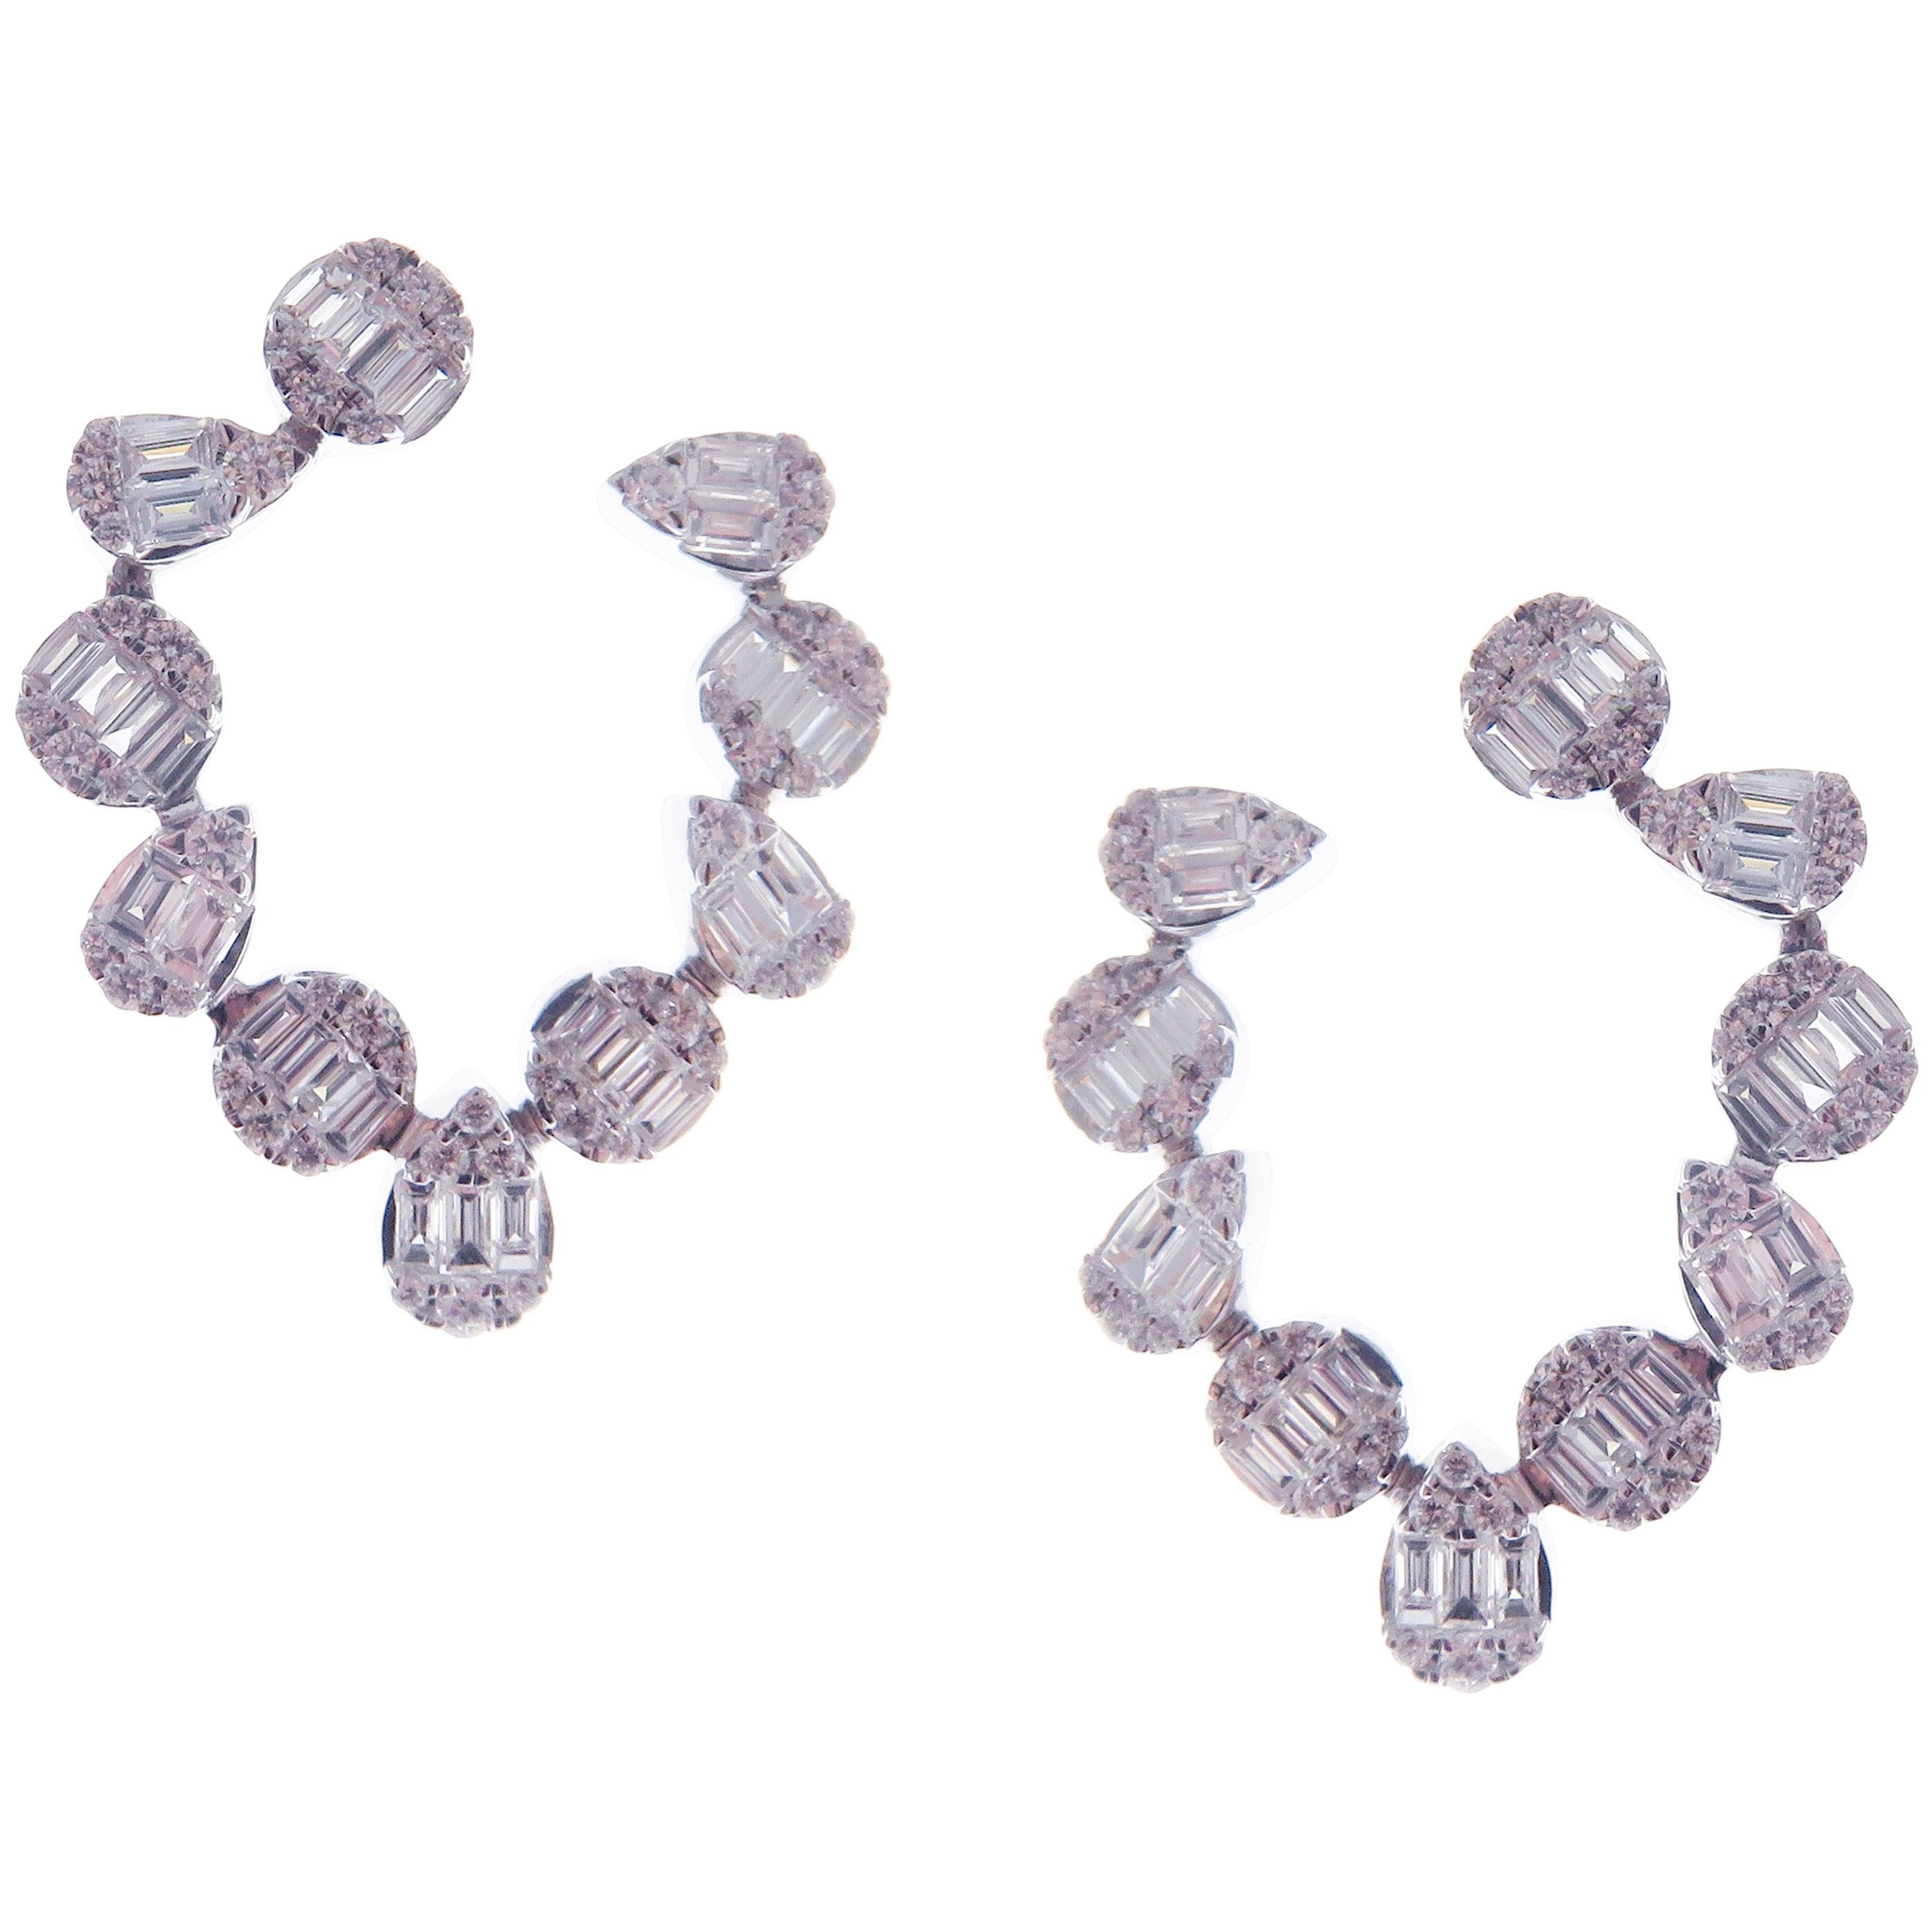 These trendy multi shapes twisty earrings with illusion setting round and baguette white diamonds are crafted in 18-karat white gold, featuring 84 round white diamonds totaling of 0.68 carats and 62 baguette white diamonds totaling of 1.39